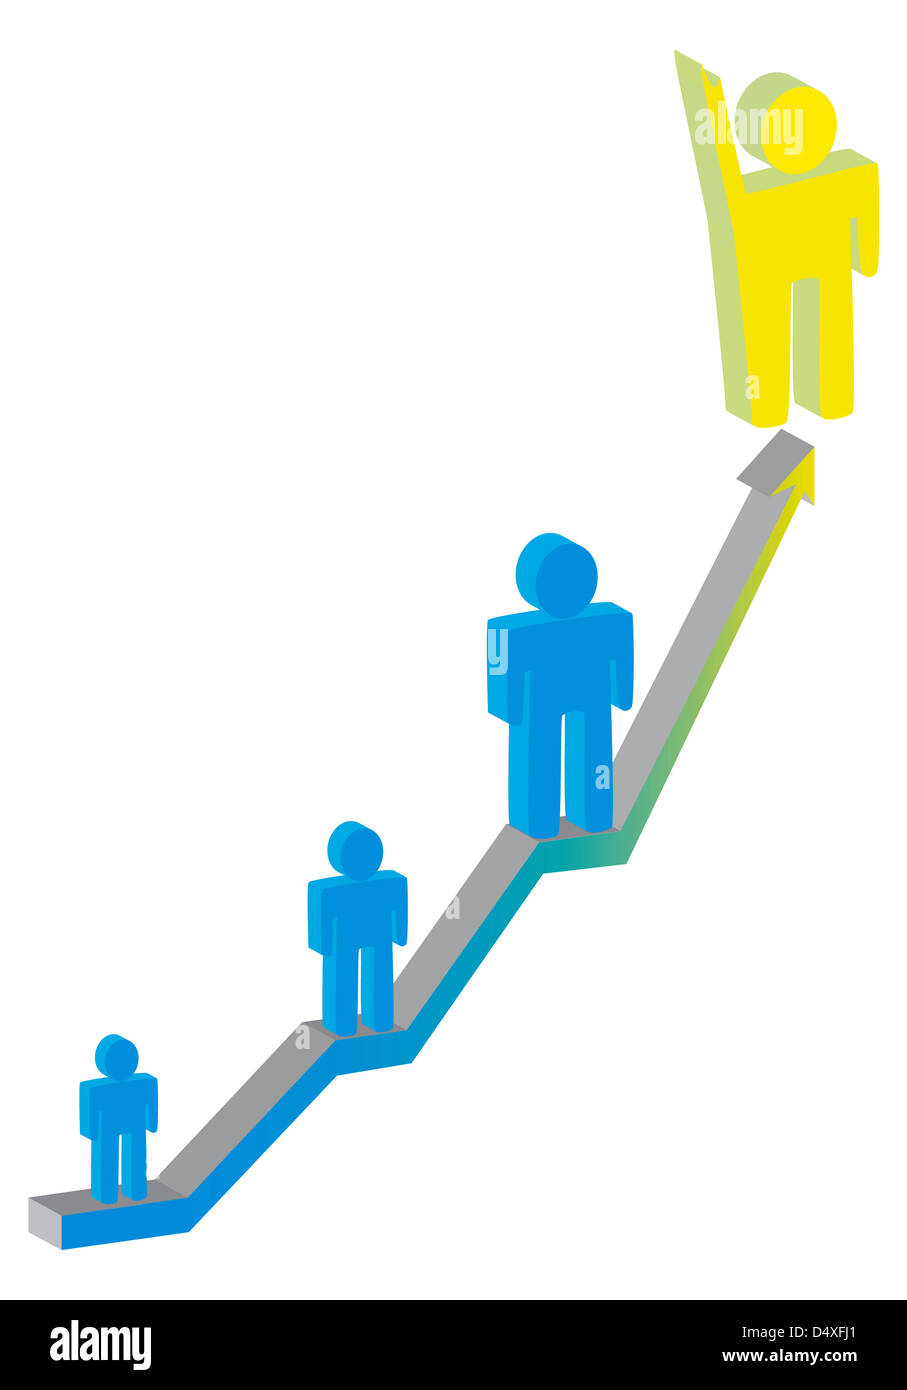 drawing of a leader on a social ladder for a successful career in business Stock Photo